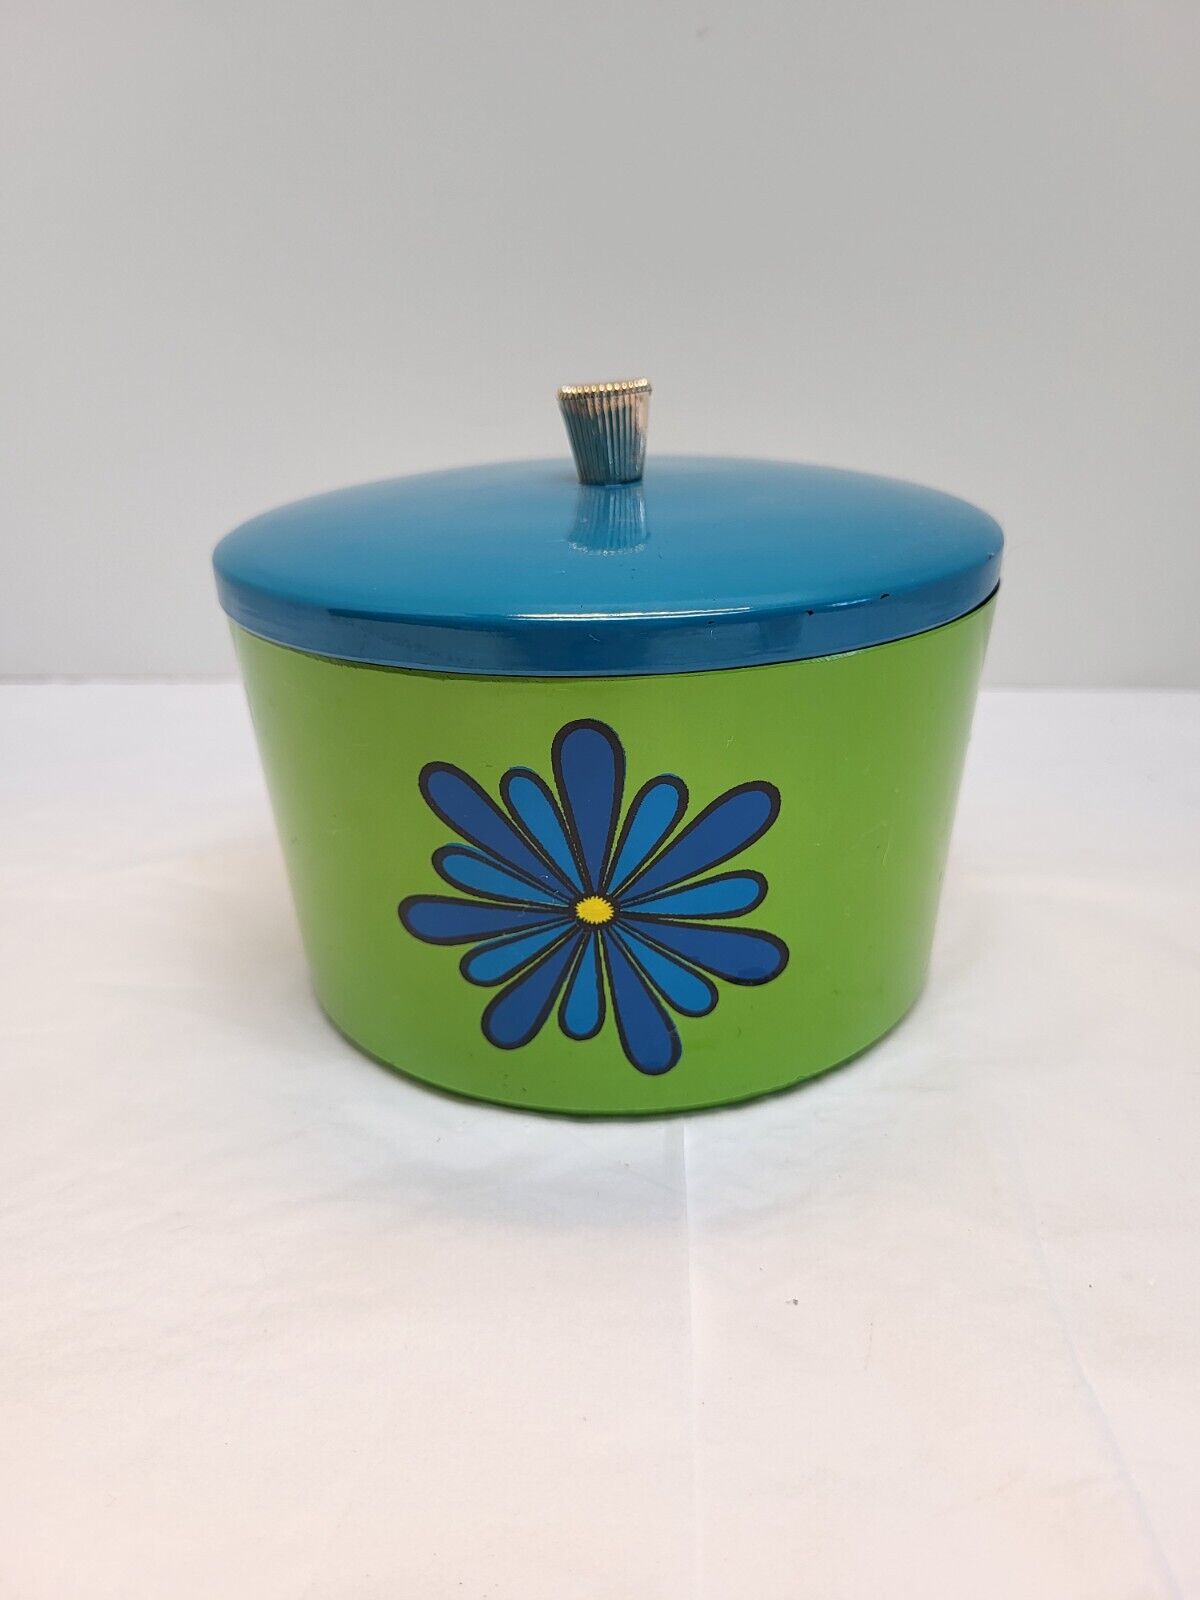 Vintage 1970s Blue Daisy Plastic Container with Lid